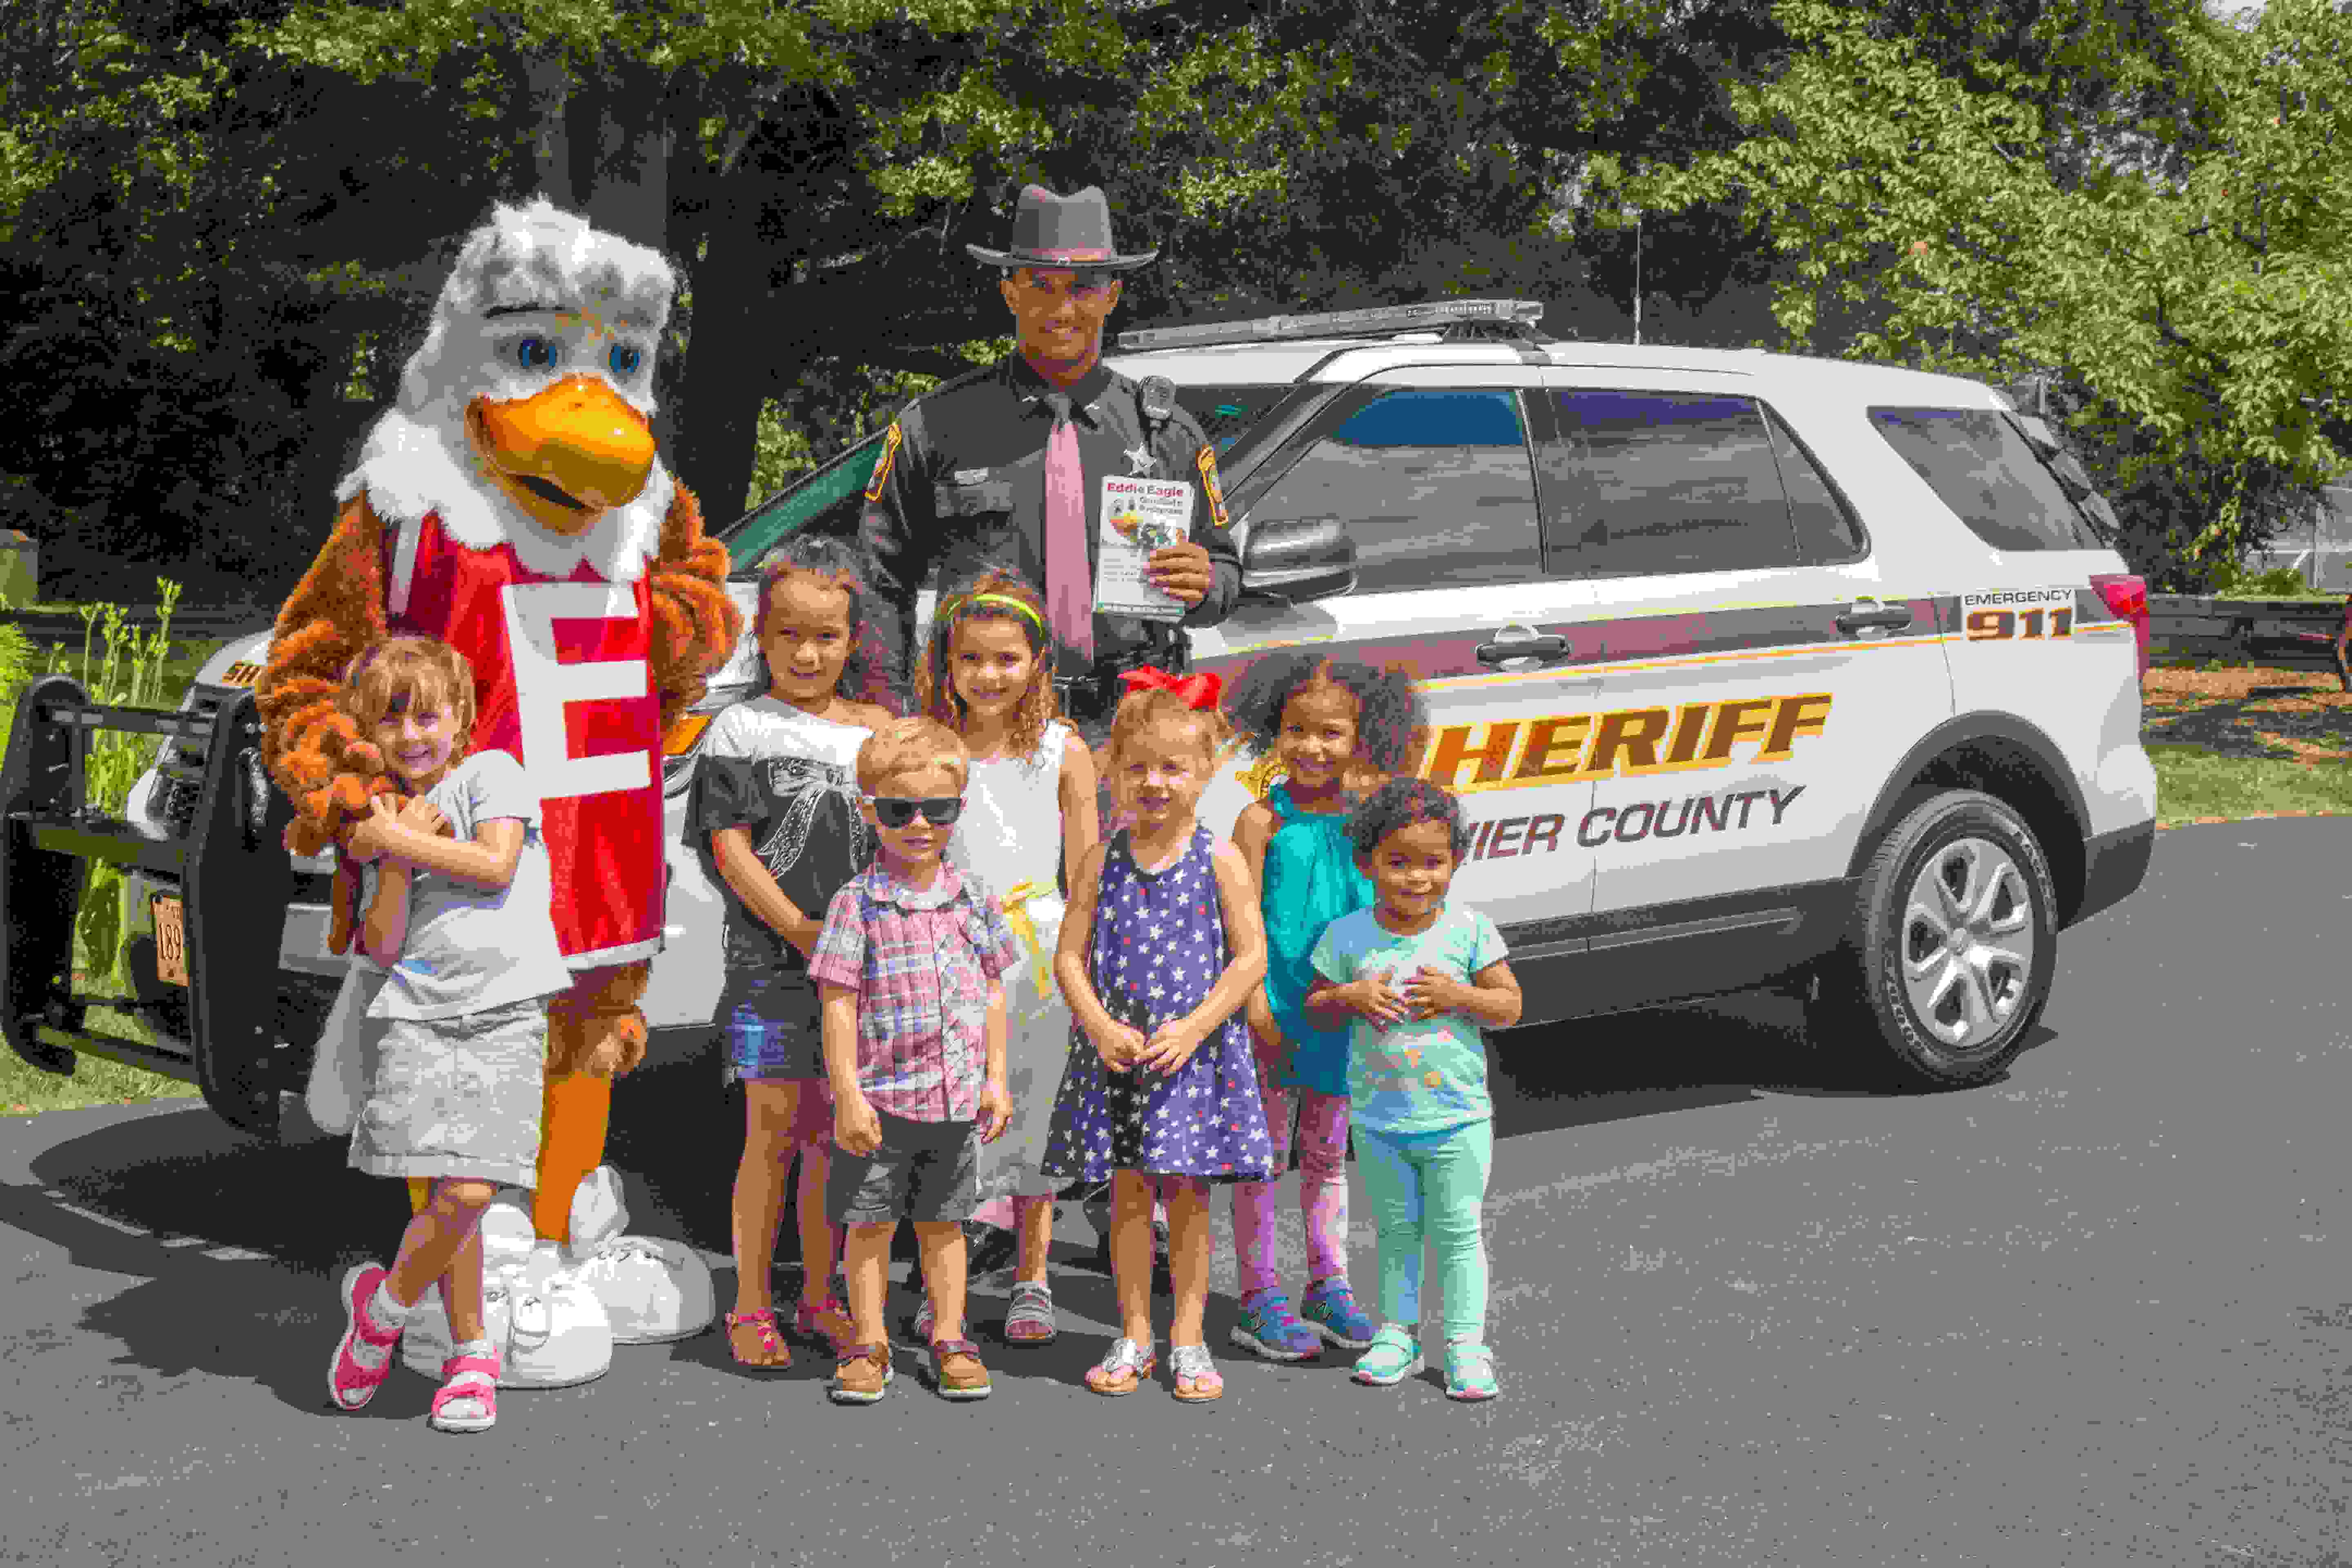 Eddie Eagle Mascot With Children and a Sheriff Outside Standing in Front of a Sheriff Vehicle